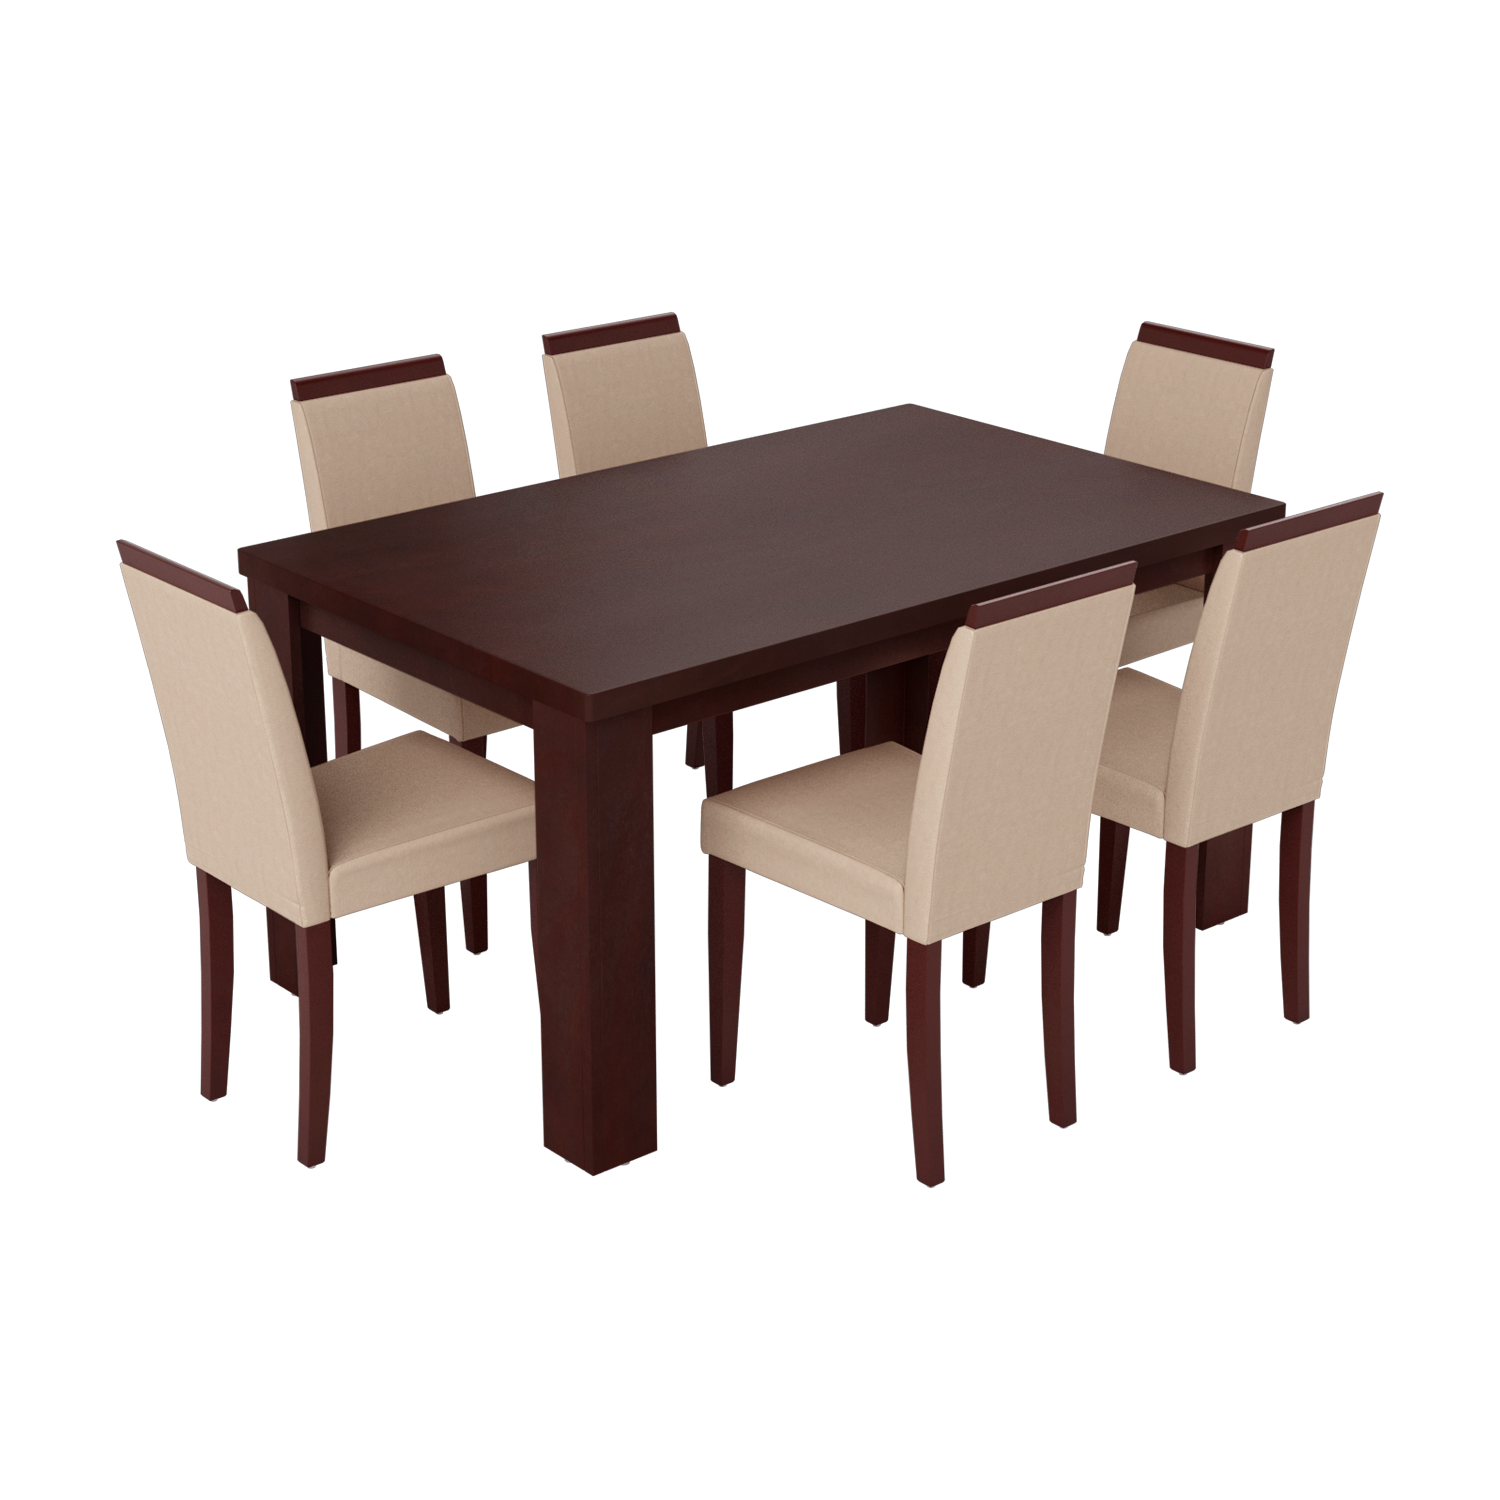 Jack 6 Seater Dining Table Set In, How Big Is A 6 Chair Table